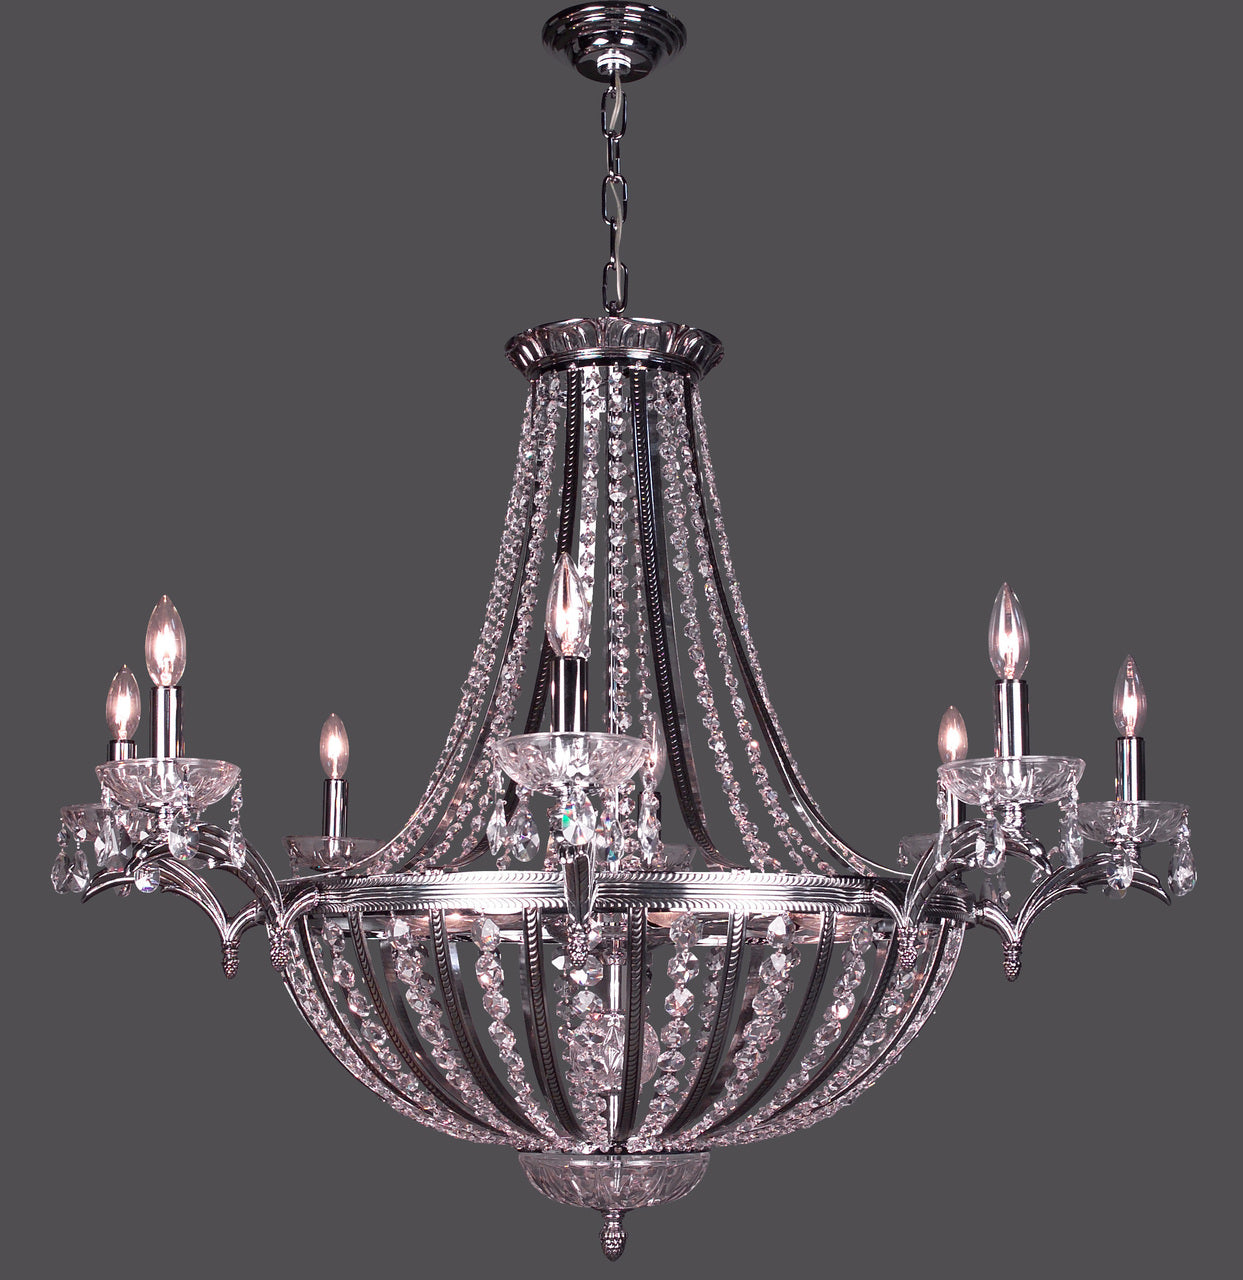 Classic Lighting 1928 CHB SC Terragona Crystal Chandelier in Chrome/Black Patina (Imported from Spain)